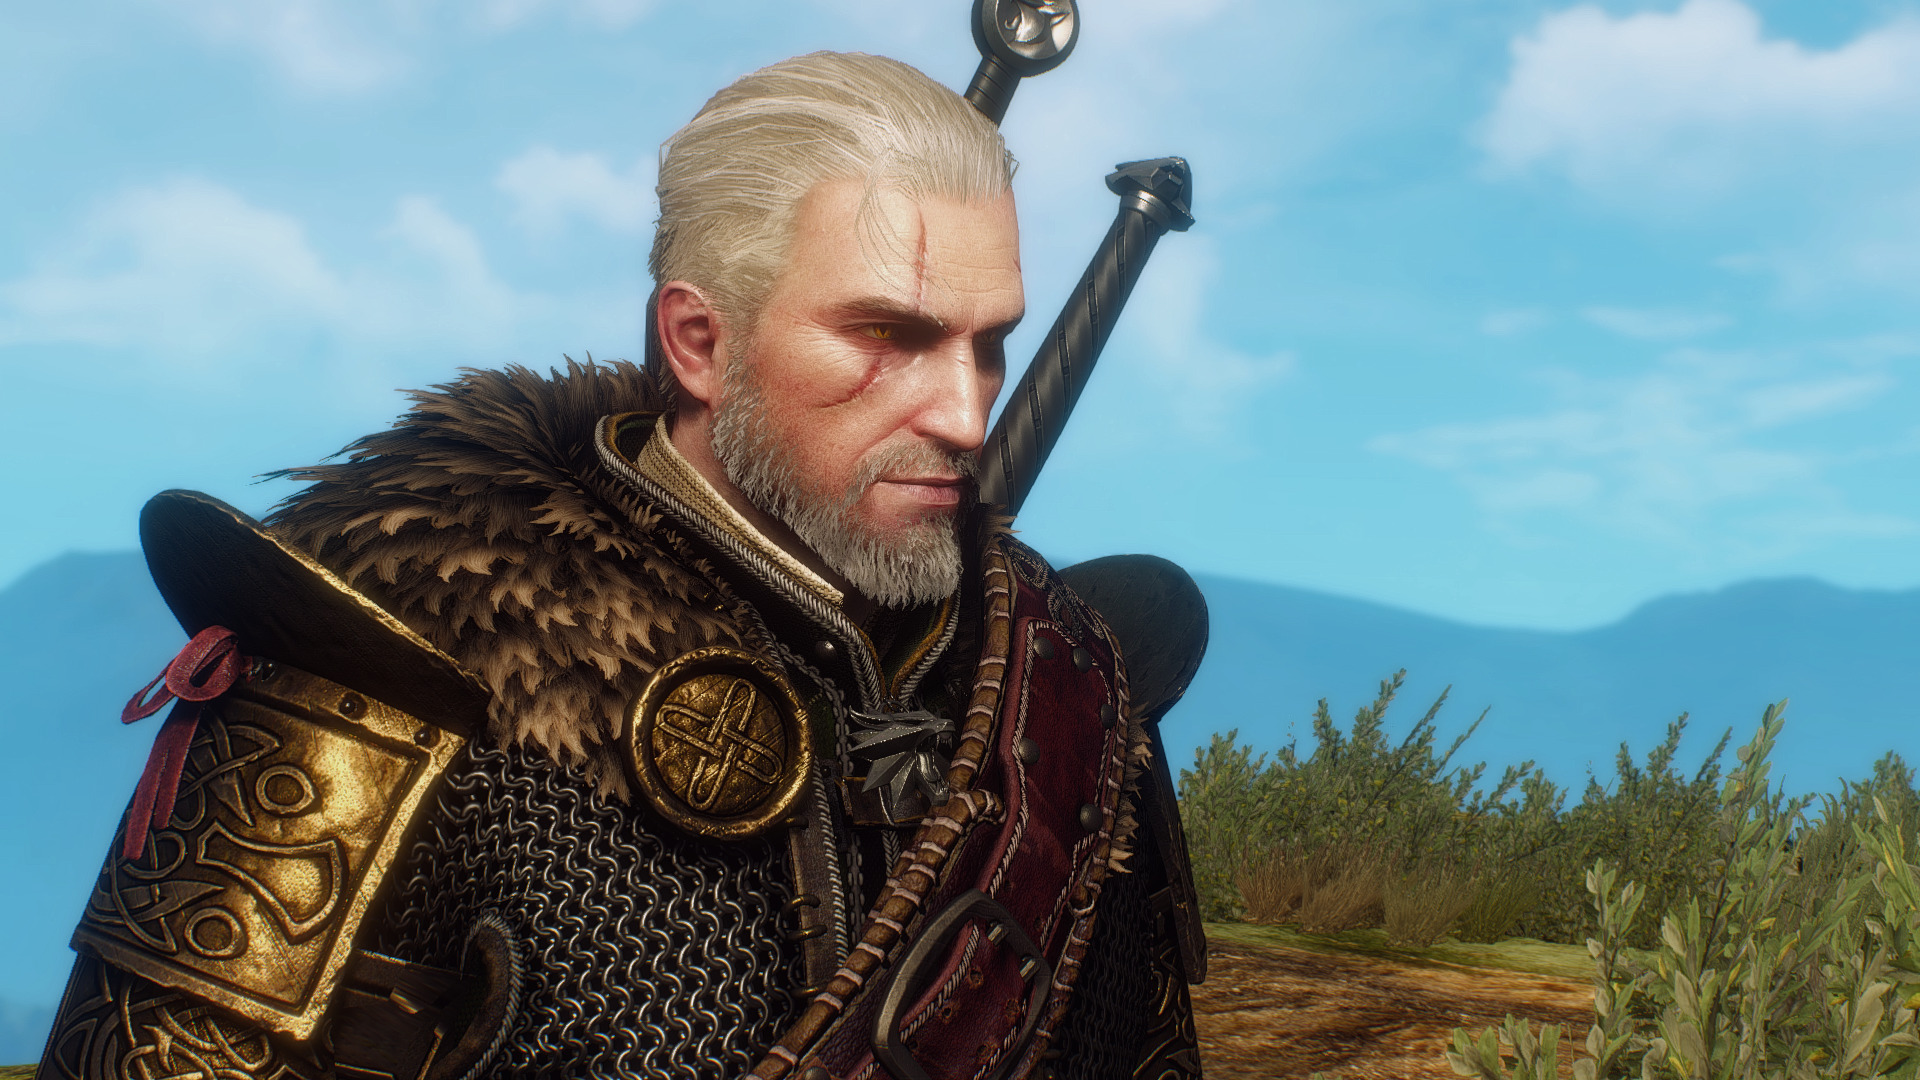 The Witcher 3: Wild Hunt, Geralt Of Rivia, The Witcher Wallpaper